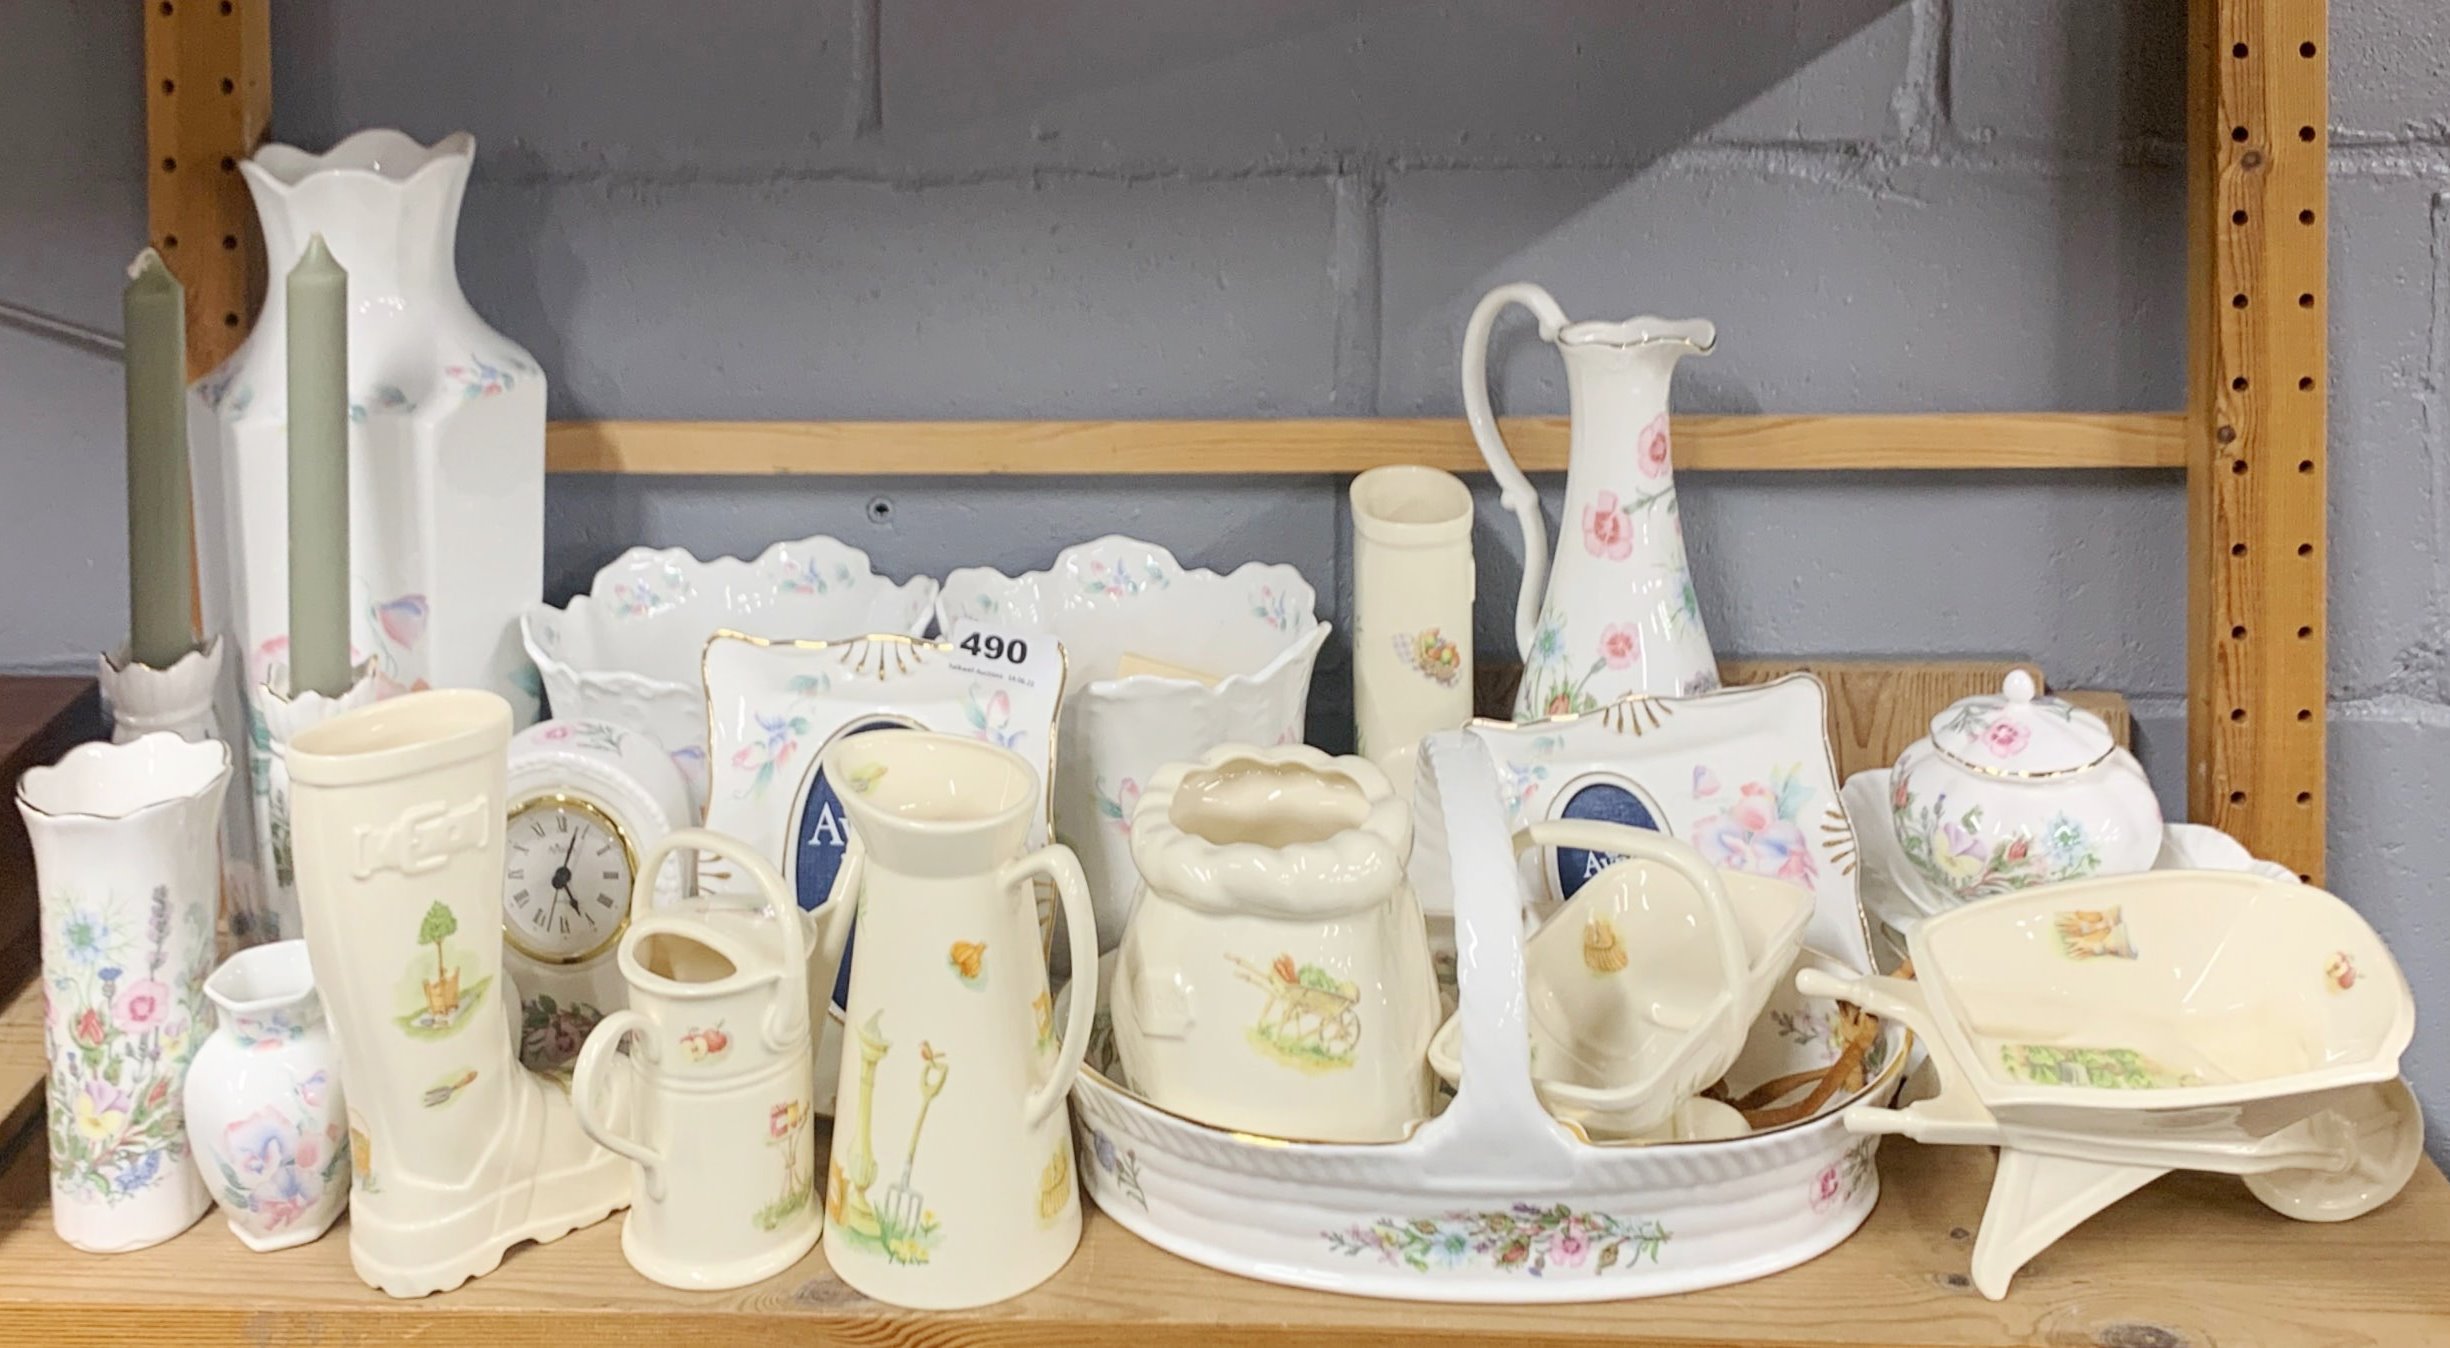 An extensive collecting of Aynsley porcelain items.